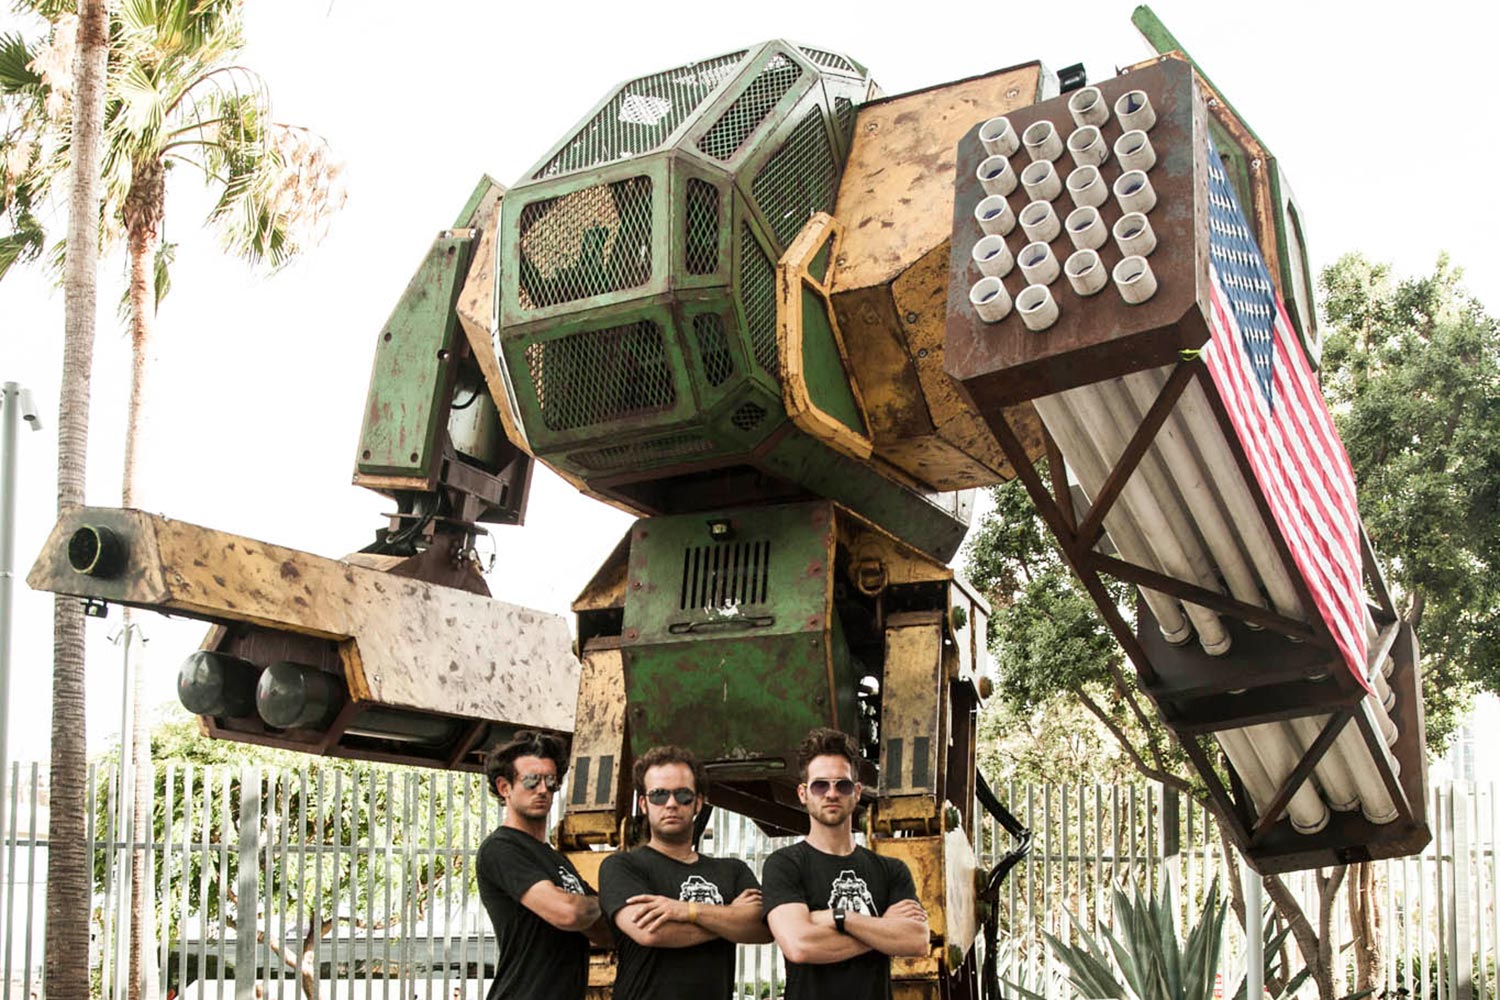 usa and japan are having a giant robot duel mkii with team